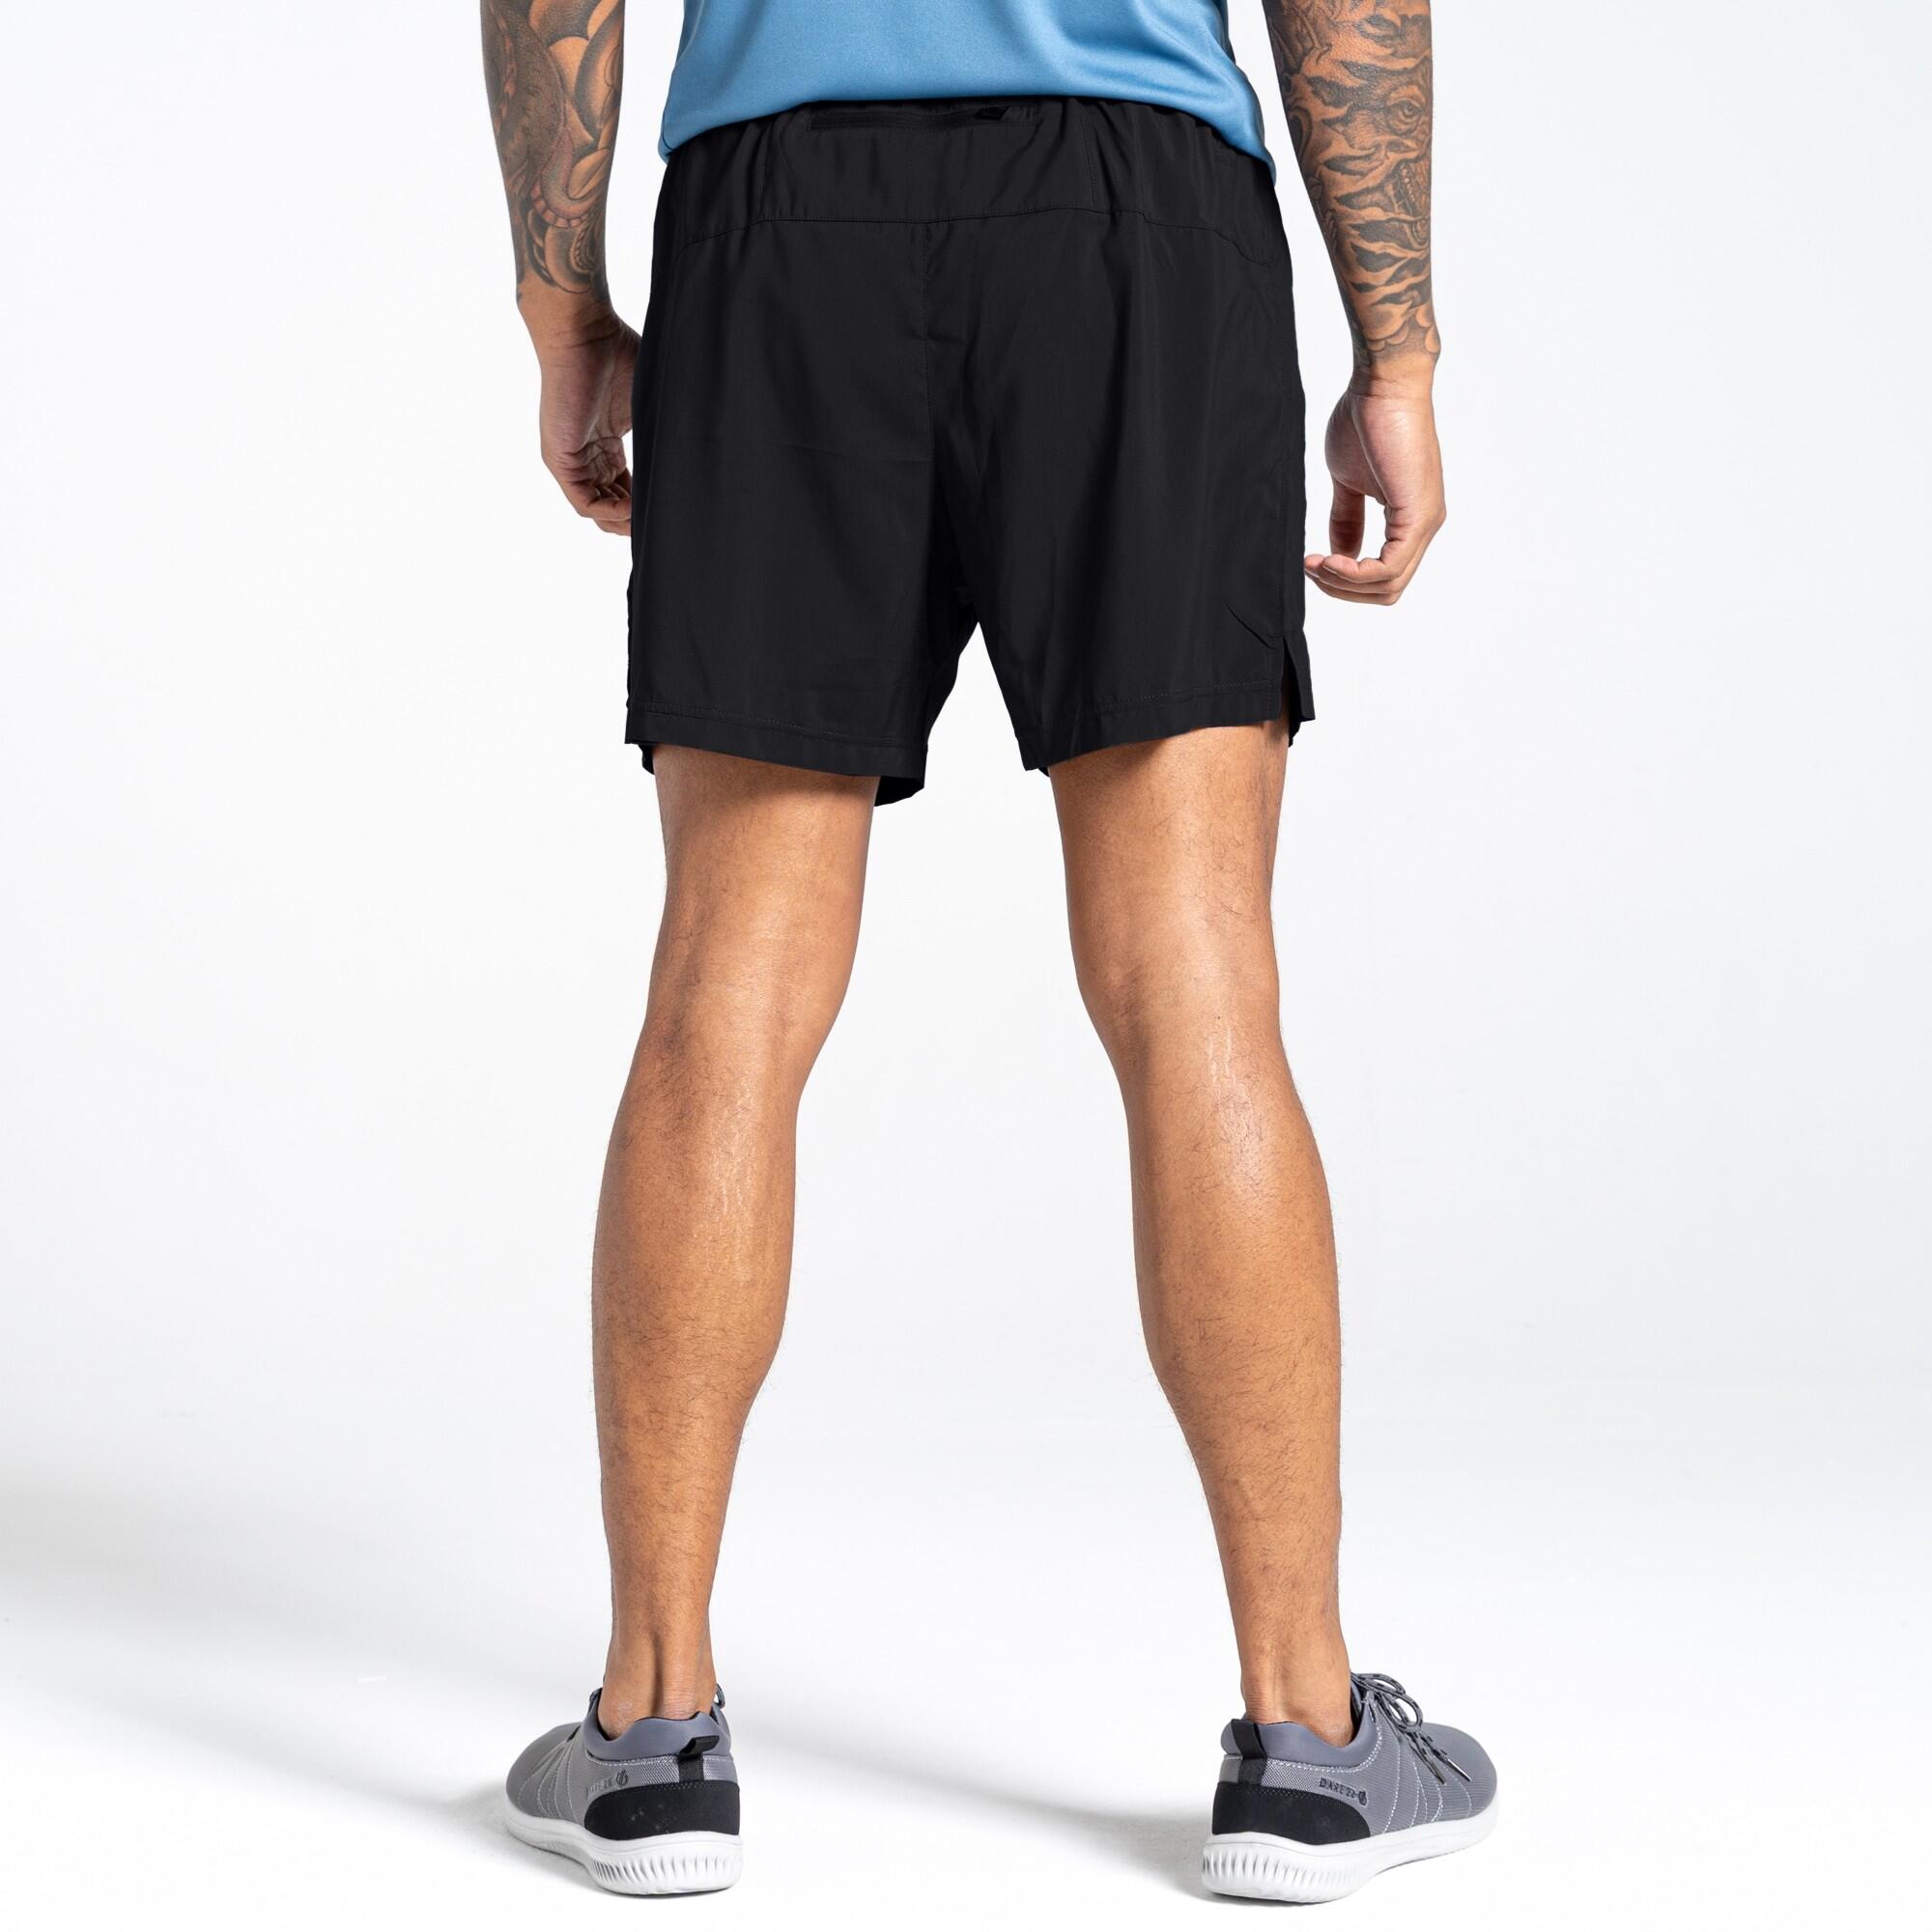 Mens Accelerate Fitness Shorts (Black) 2/5